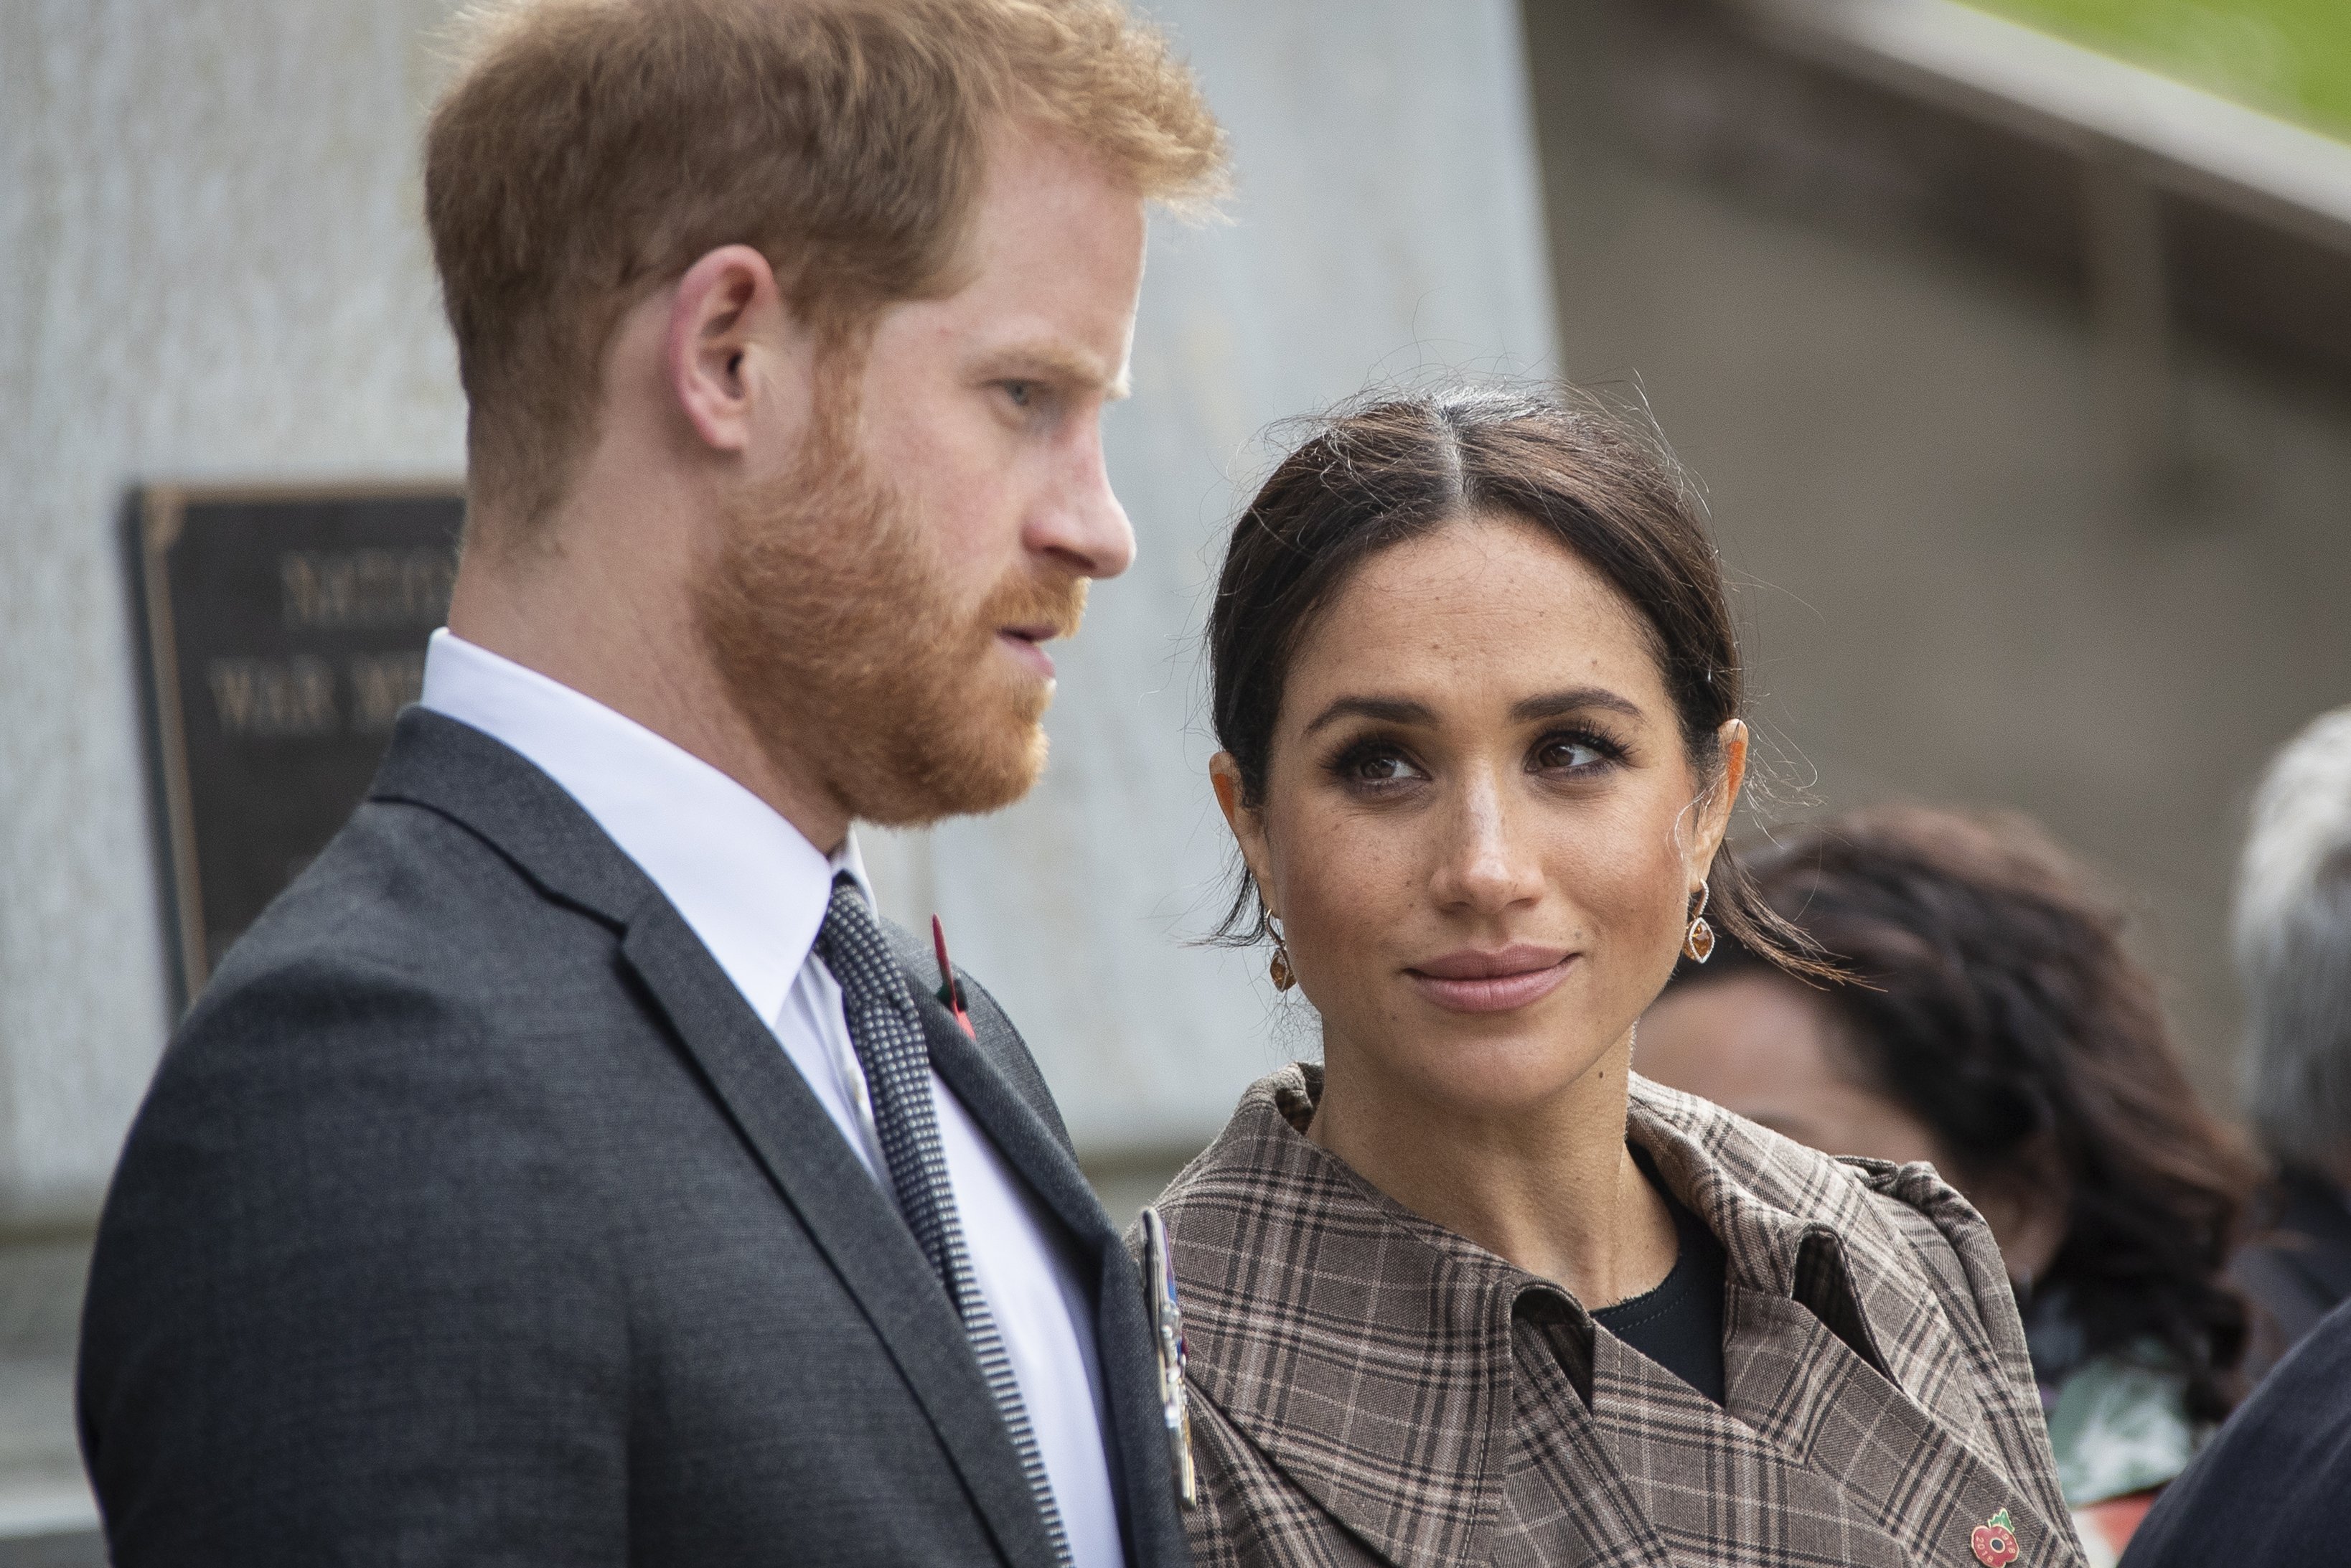 Prince Harry and Meghan Markle at the newly unveiled UK war memorial and Pukeahu National War Memorial Park, on October 28, 2018, in Wellington, New Zealand. / Source: Getty Images